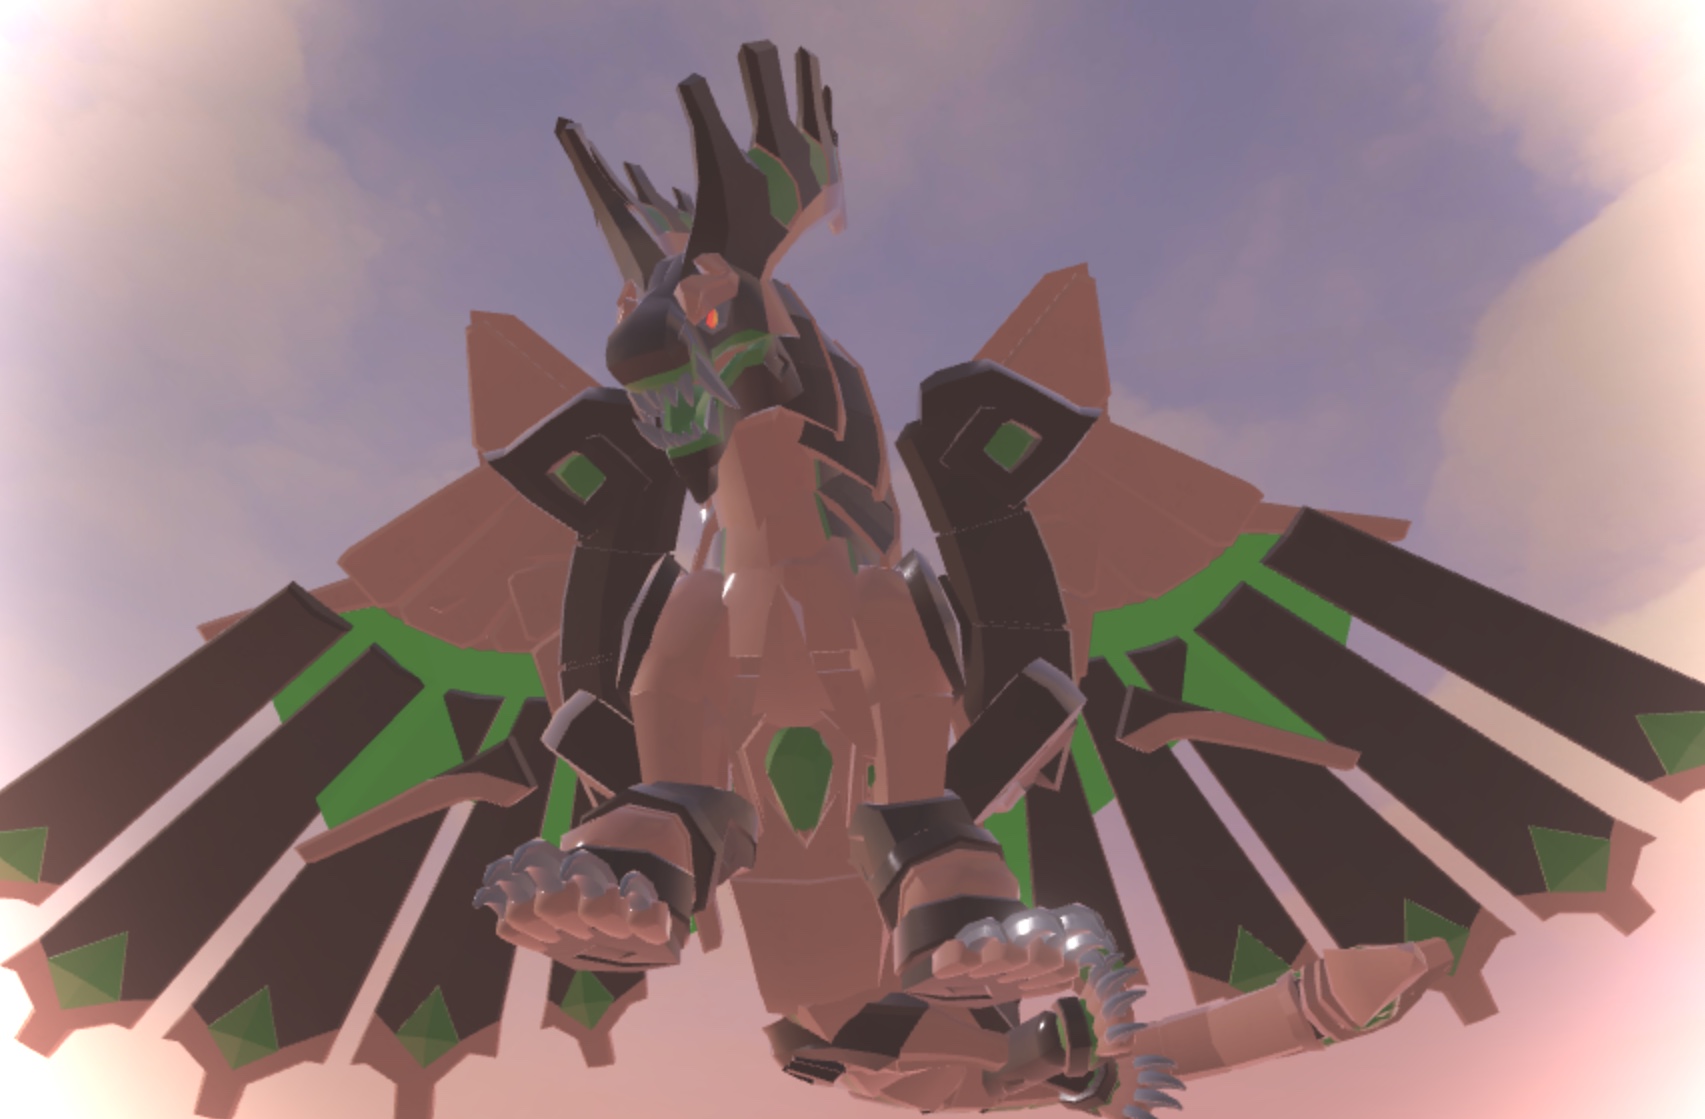 Now Solstice Is Gone Here Are Some Photographs I Took During The Event Enjoy Fandom - roblox dragon adventures paukiki remodel